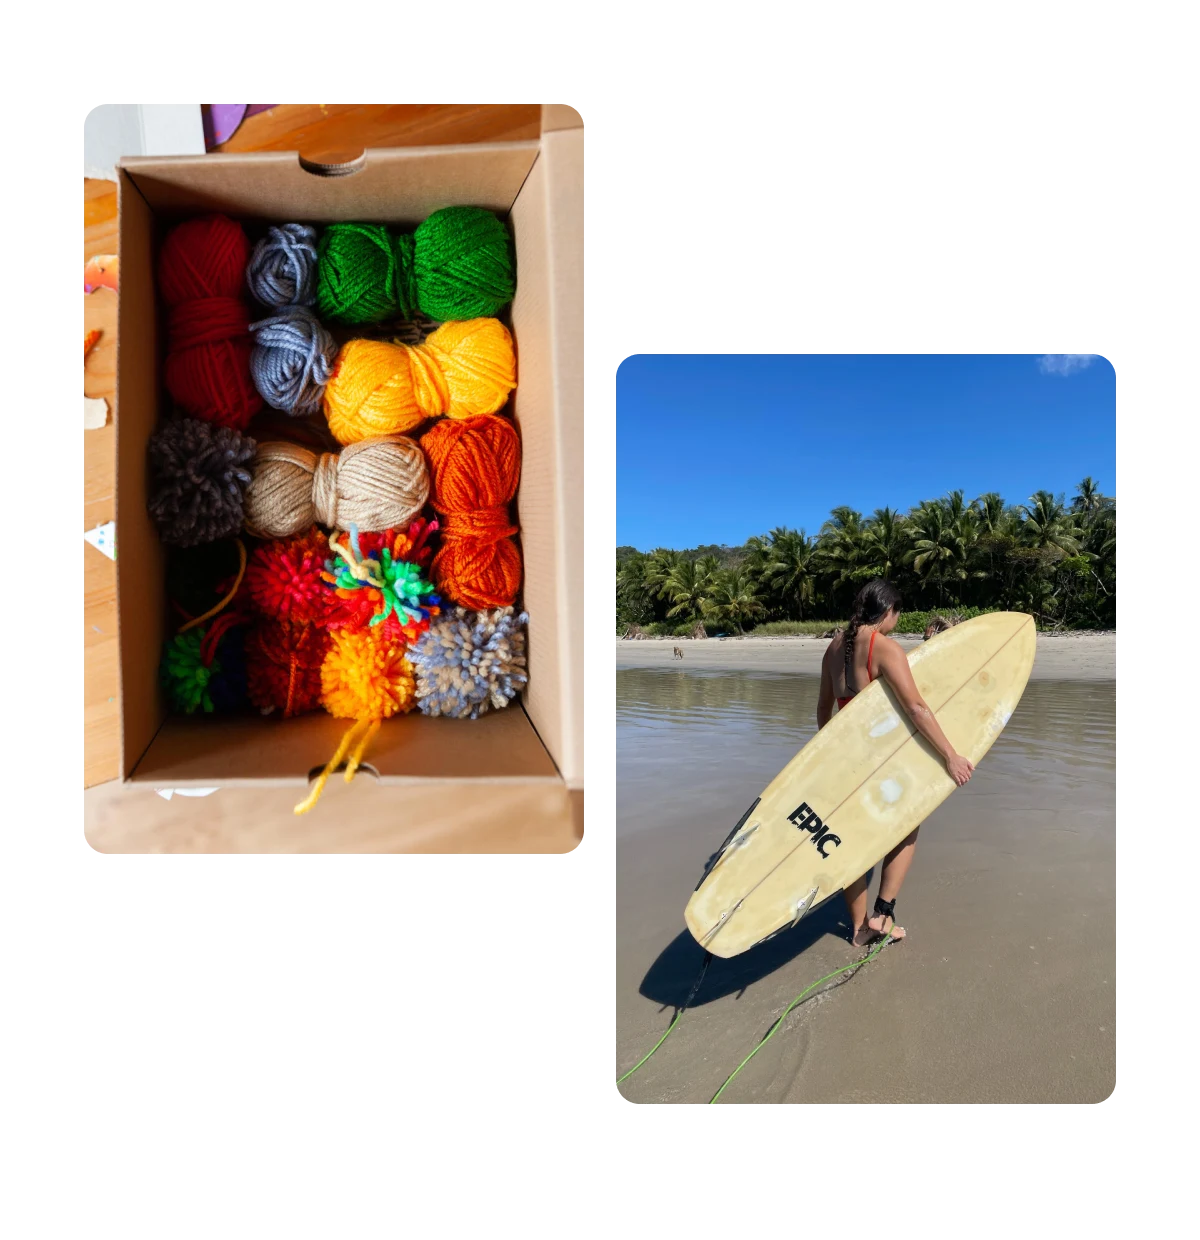 Two pins, box filled with colourful balls of yarn, woman carrying surf board